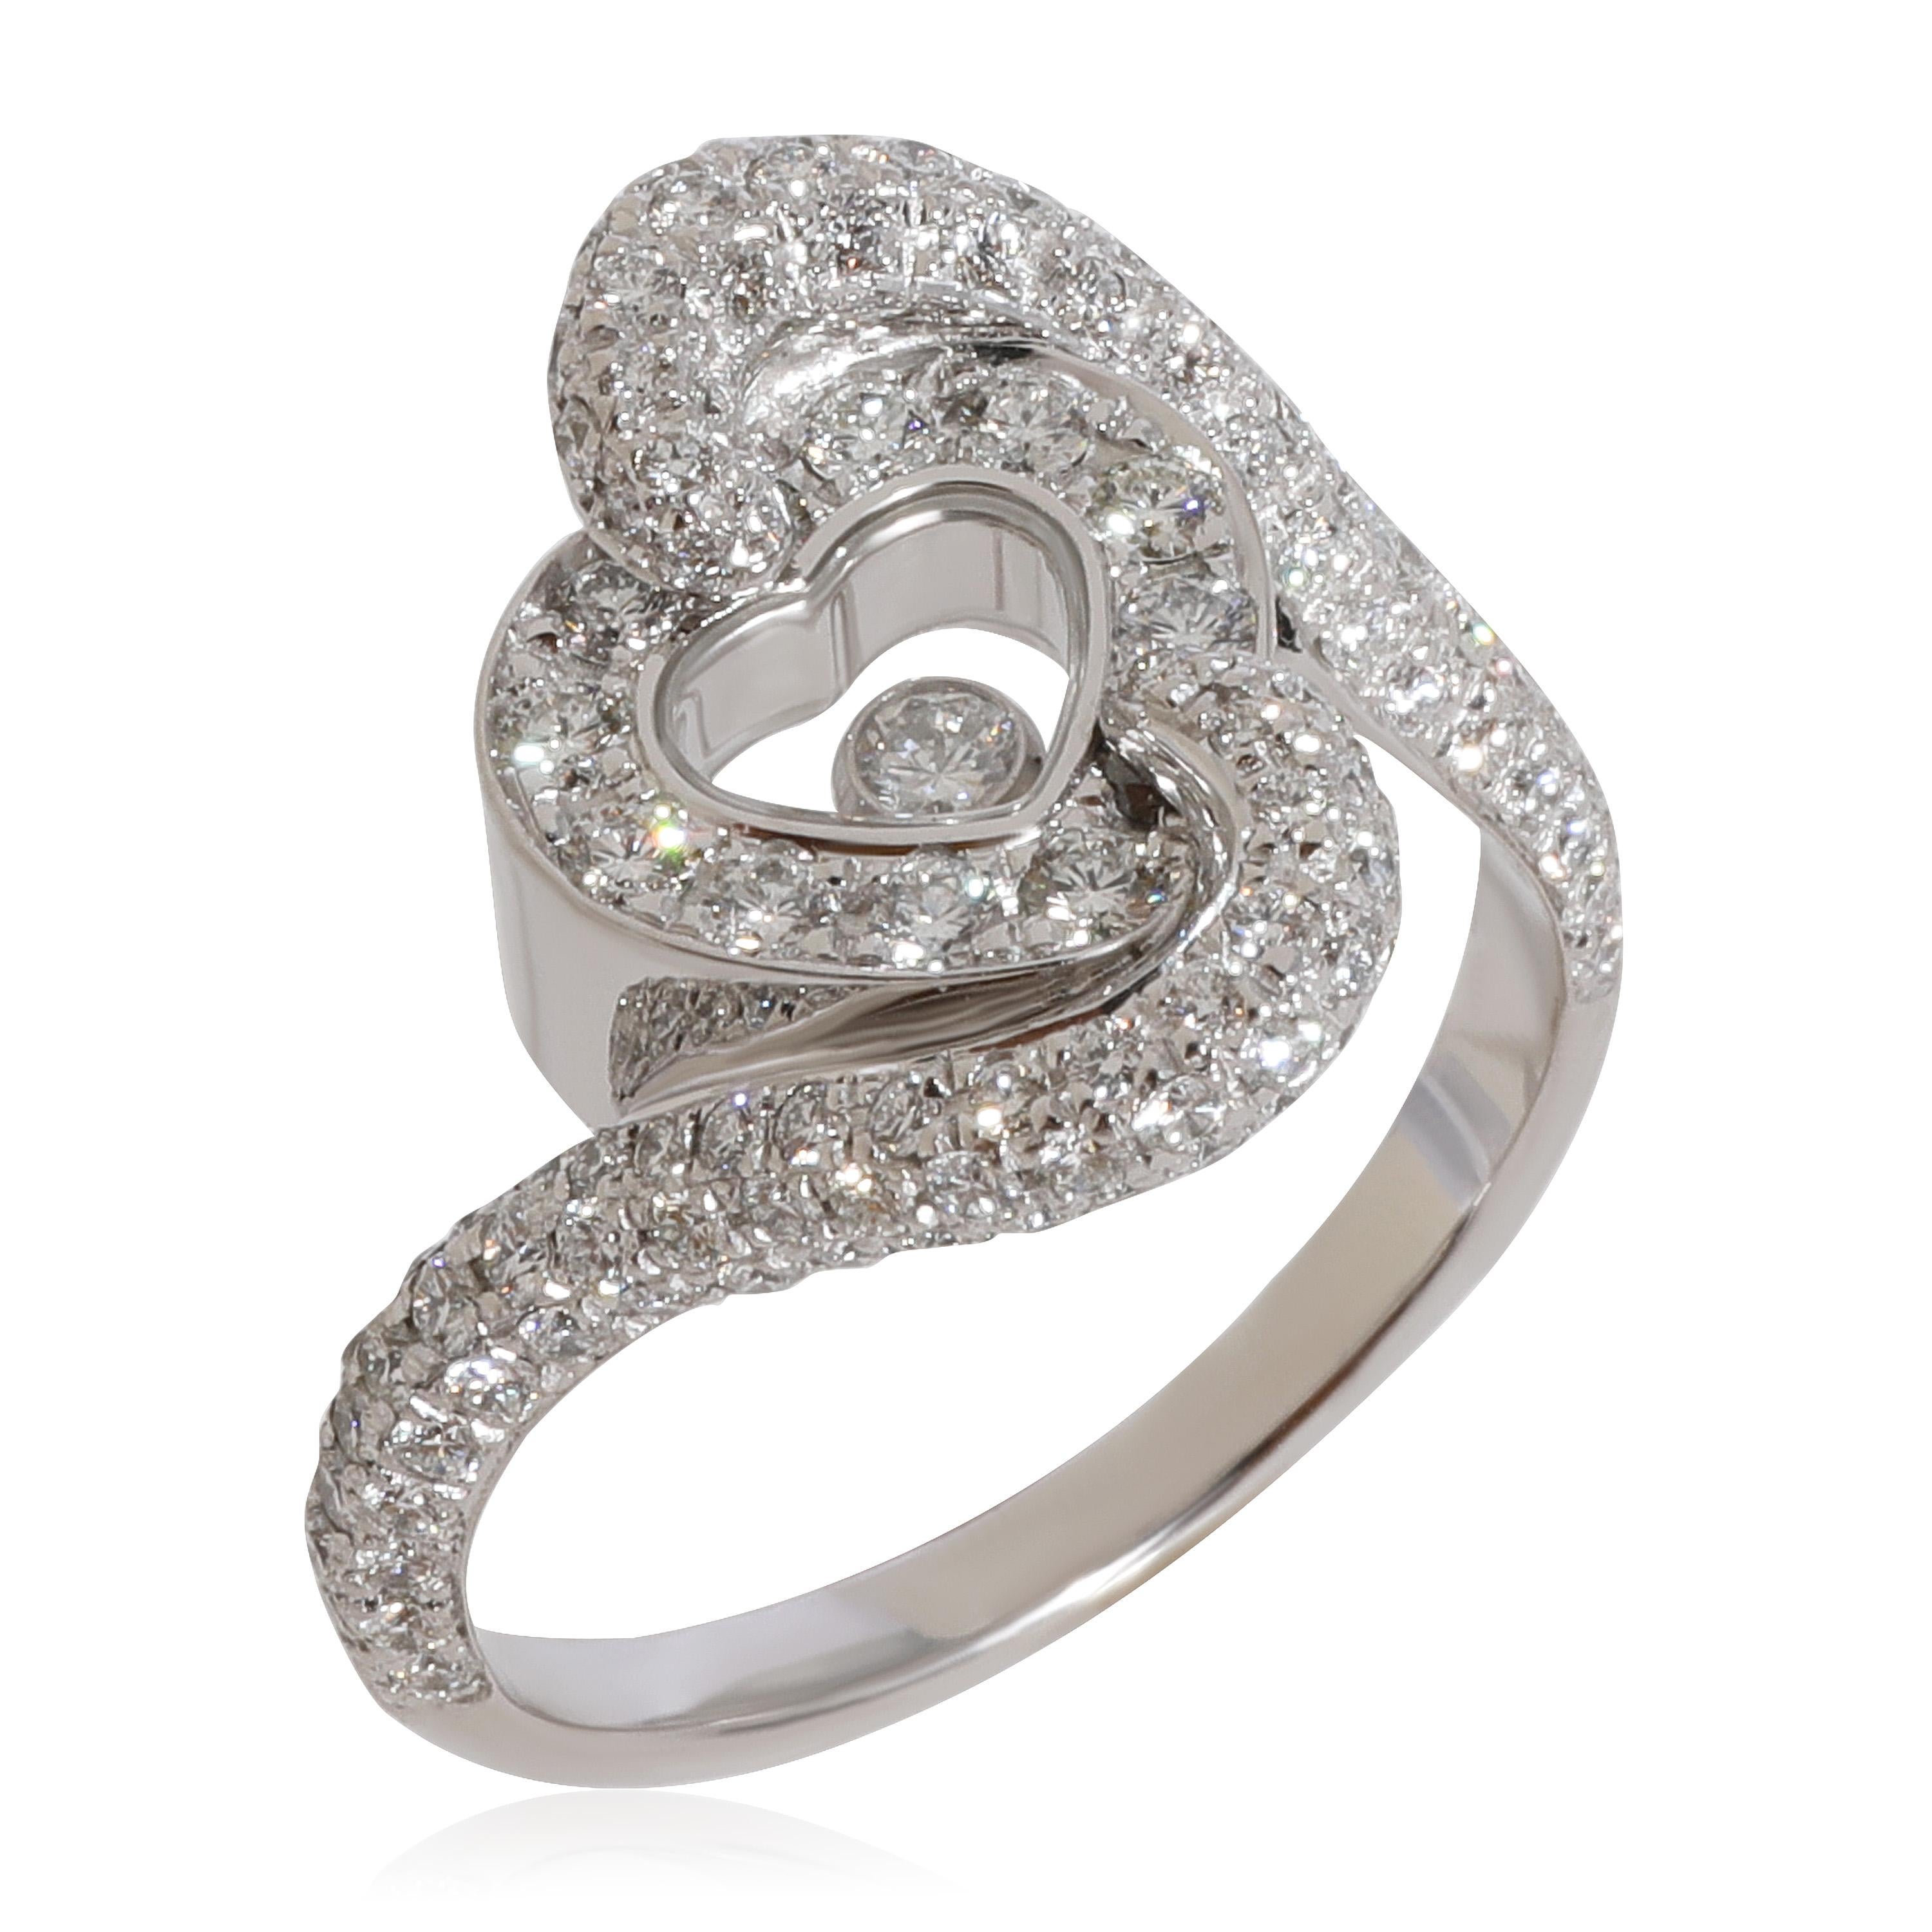 Chopard Happy Diamond Heart  Ring in 18k White Gold 0.86 CTW

PRIMARY DETAILS
SKU: 124365
Listing Title: Chopard Happy Diamond Heart  Ring in 18k White Gold 0.86 CTW
Condition Description: Retails for 13350 USD. In excellent condition and recently